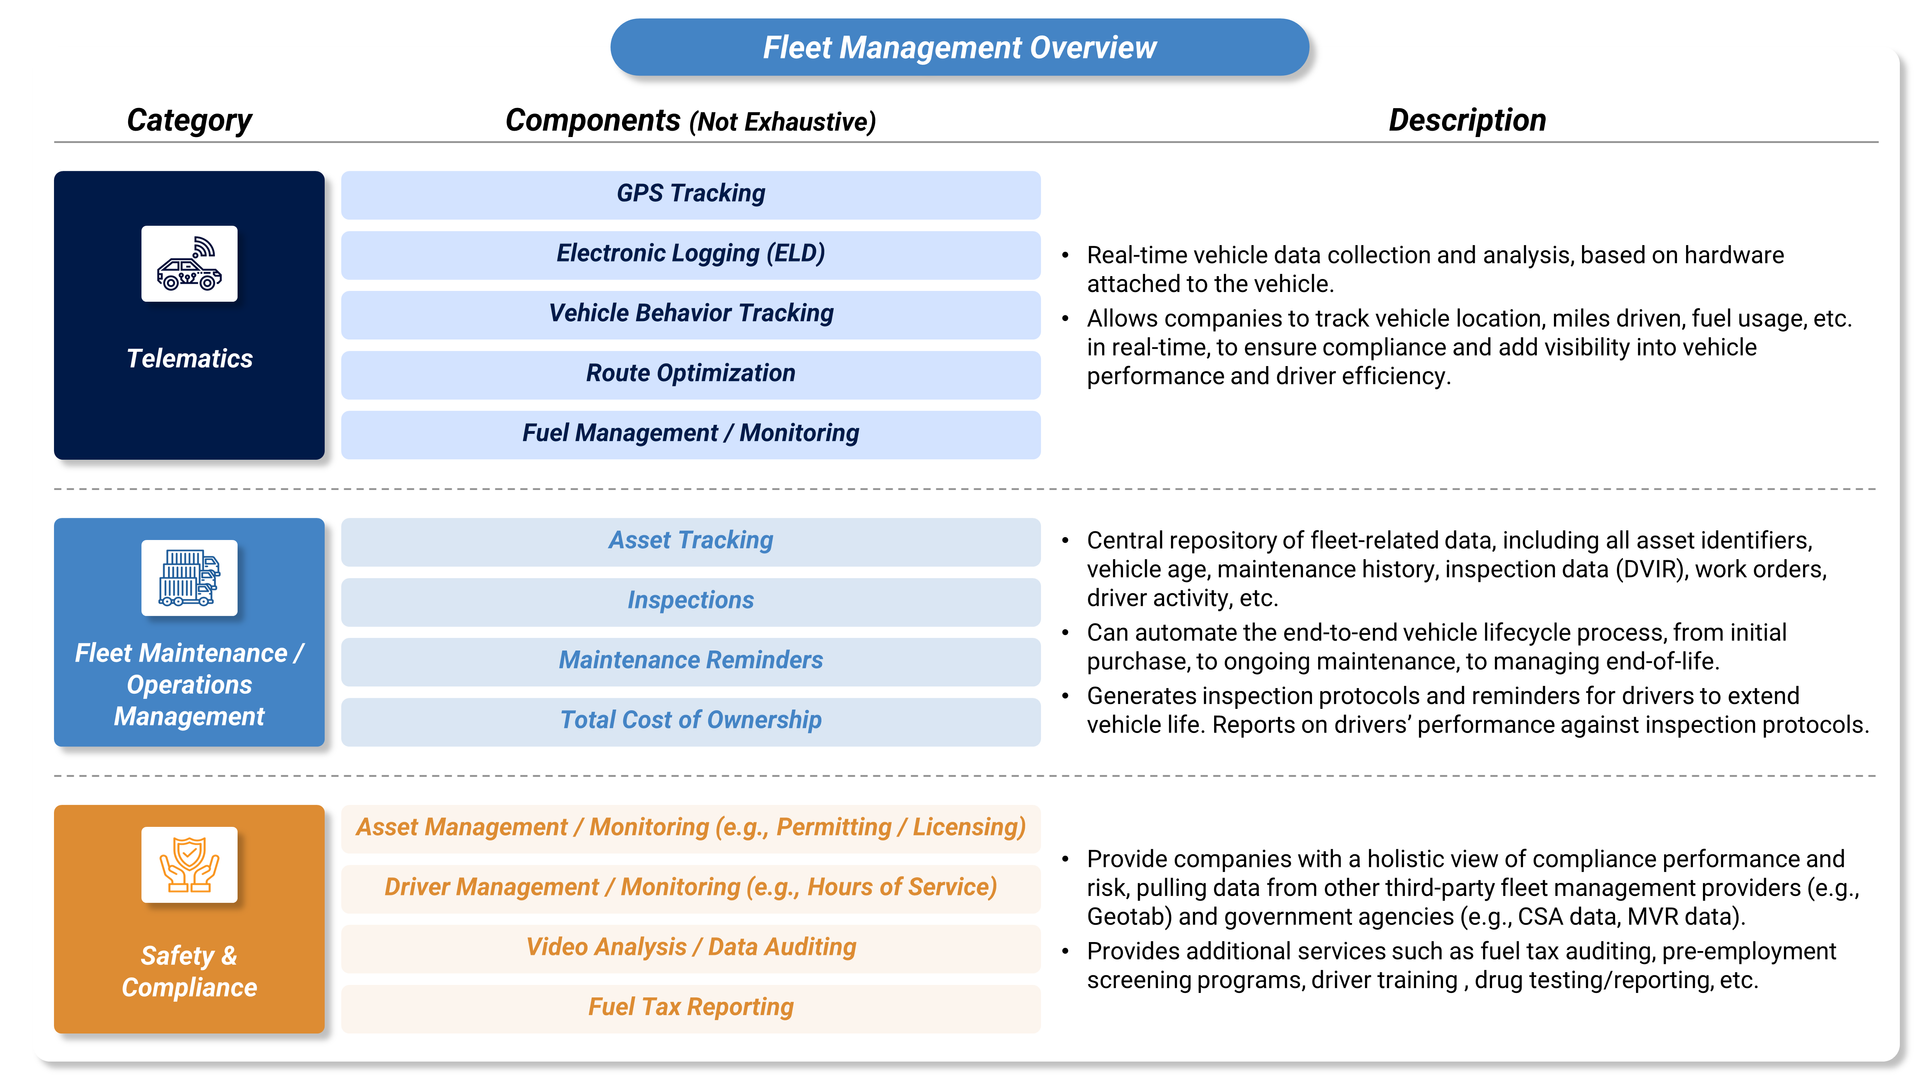 An infographic visualizing the overview of fleet management categories, components, and their descriptions.